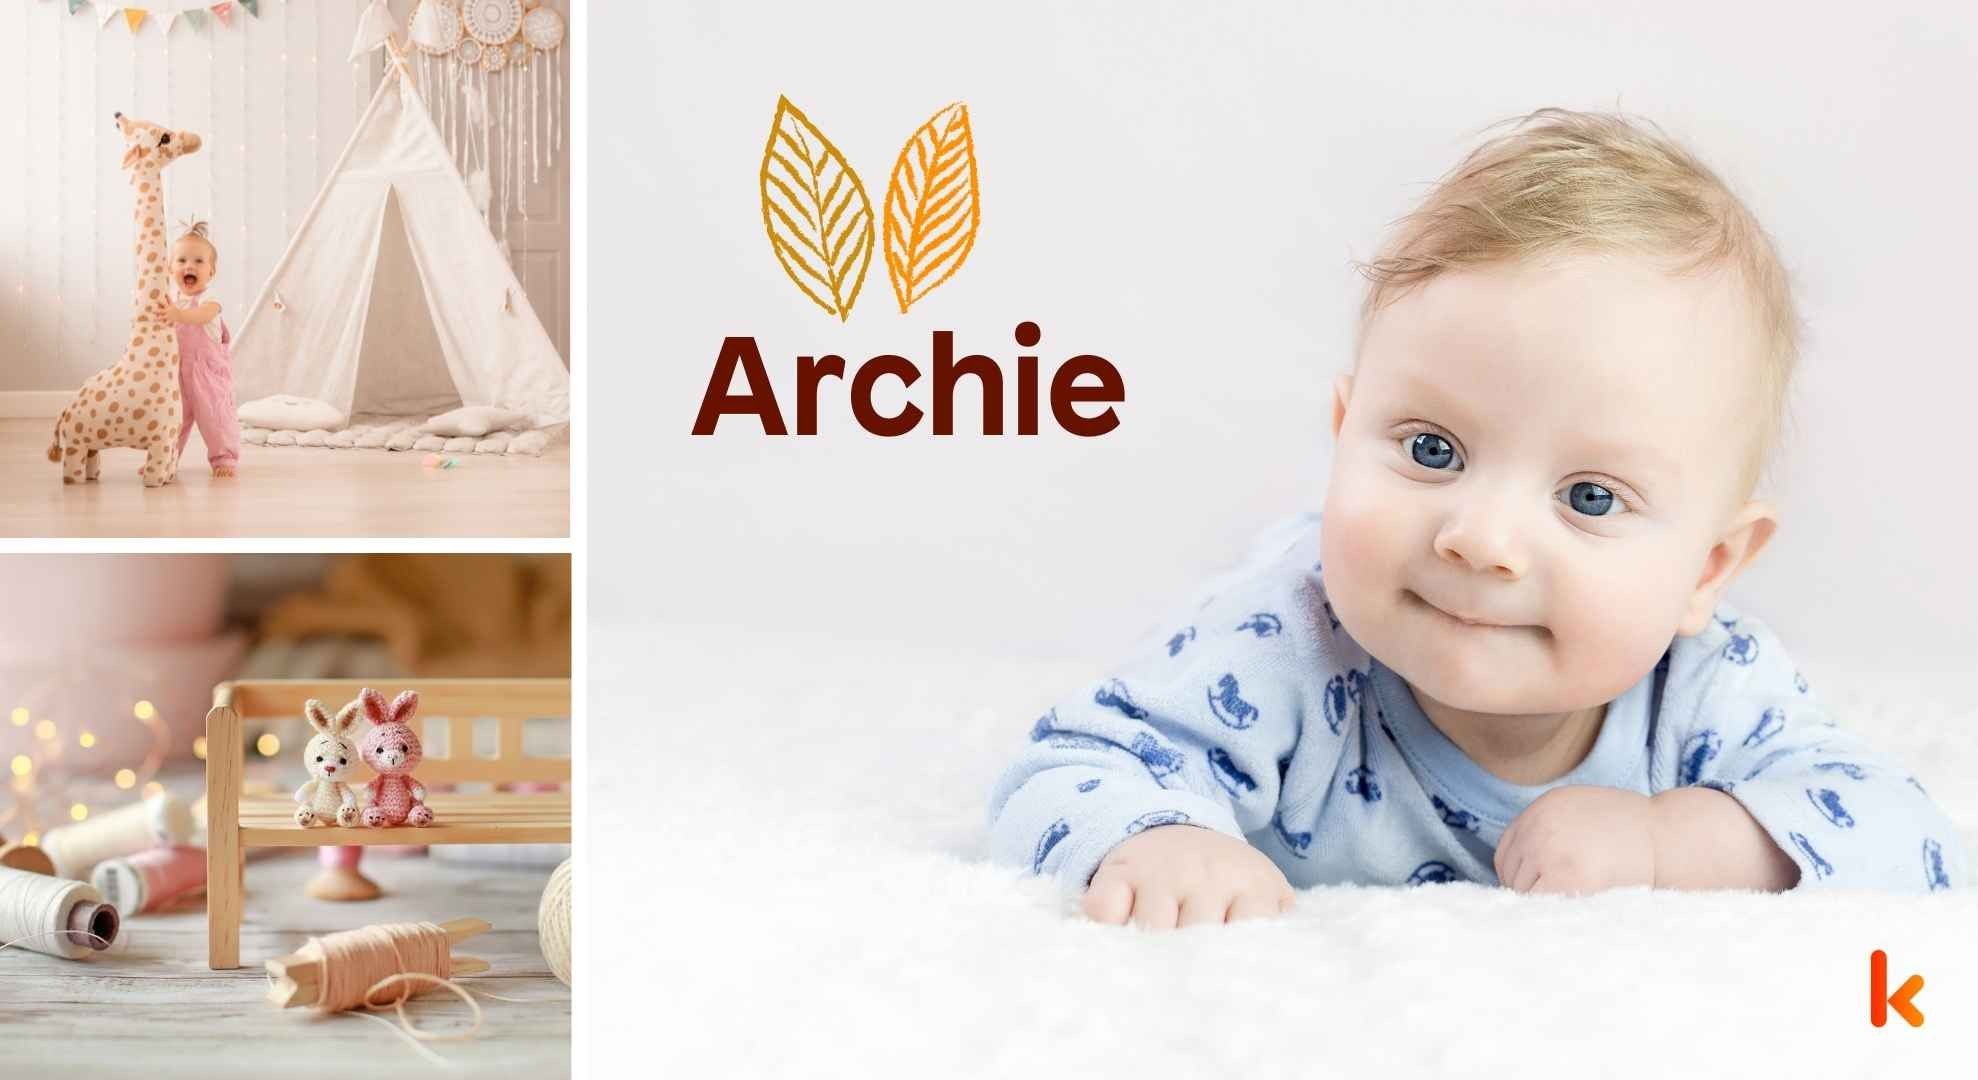 Meaning of the name Archie